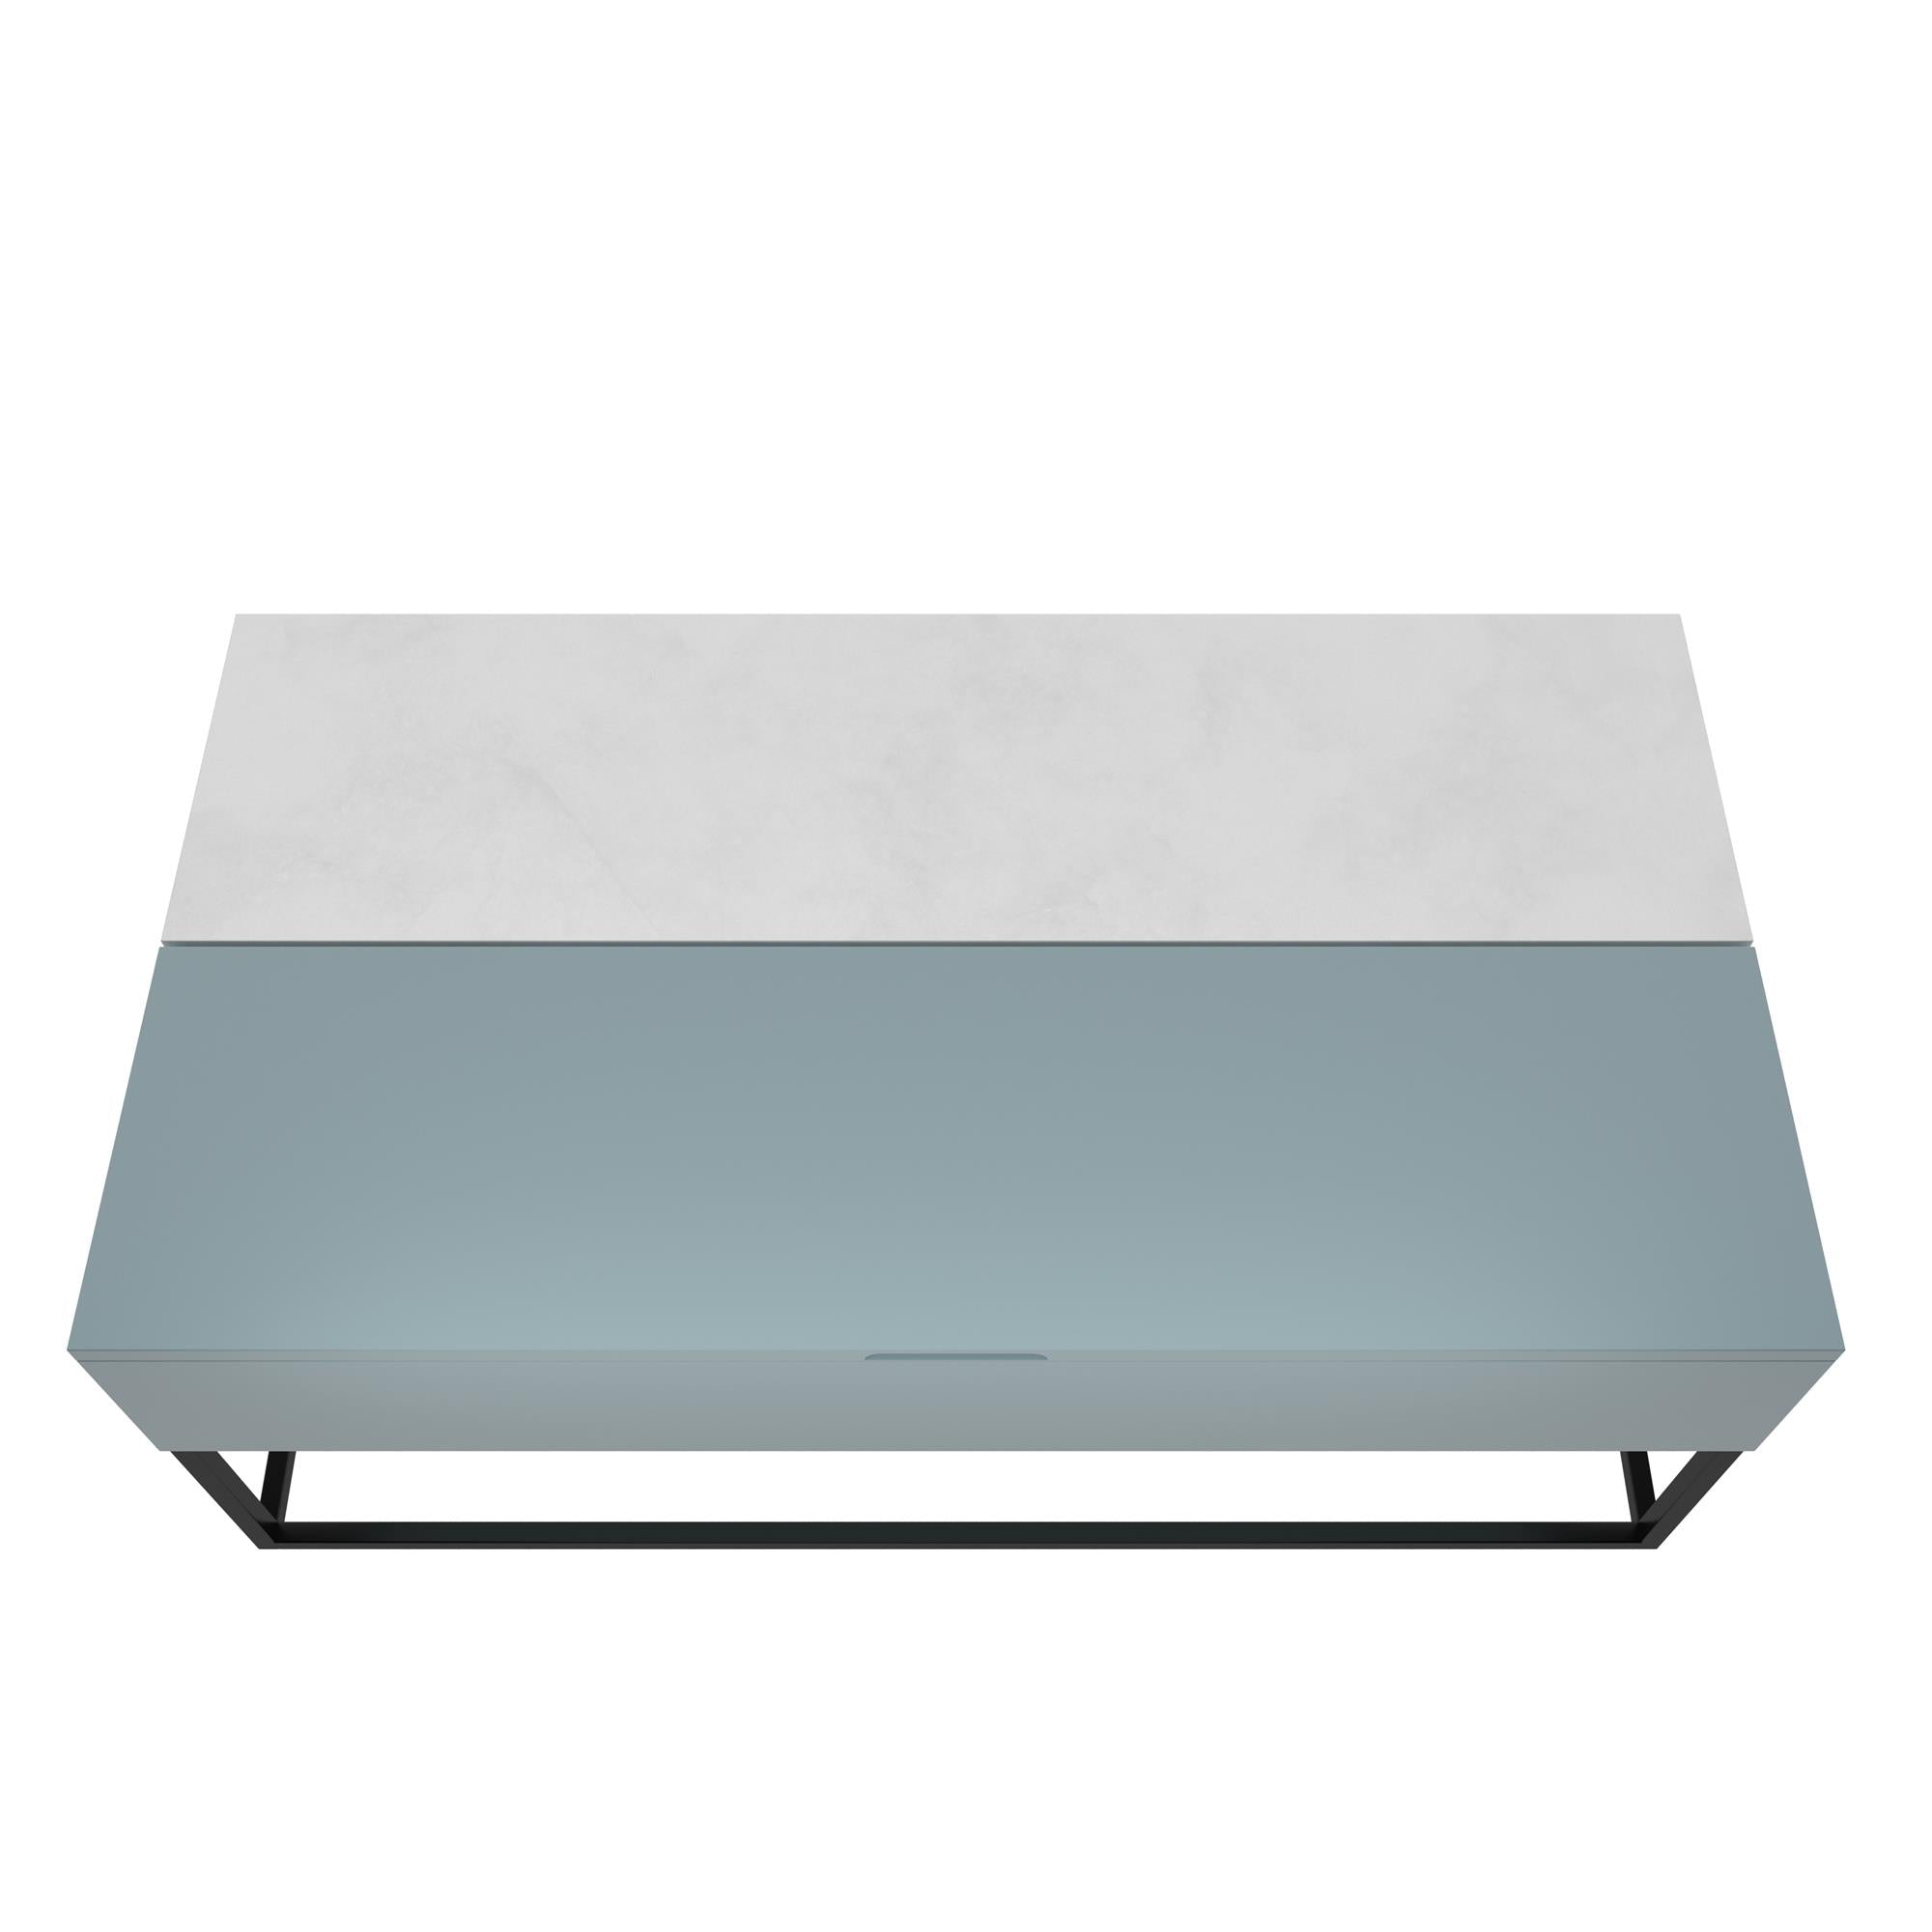 The Village Perry Lift-Top Coffee Table, Powder Blue - Powder Blue